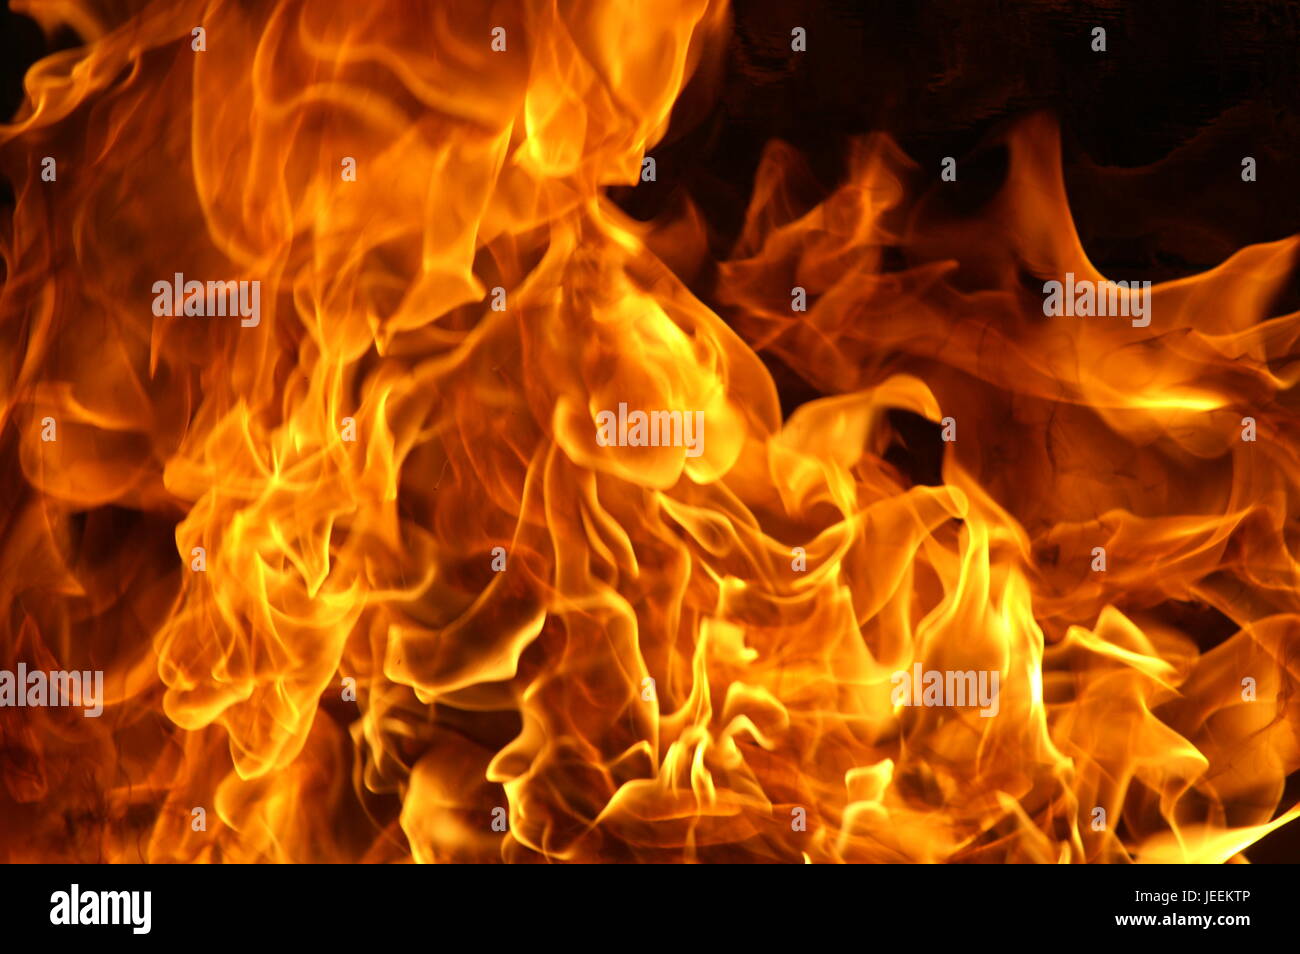 fire and flames Stock Photo